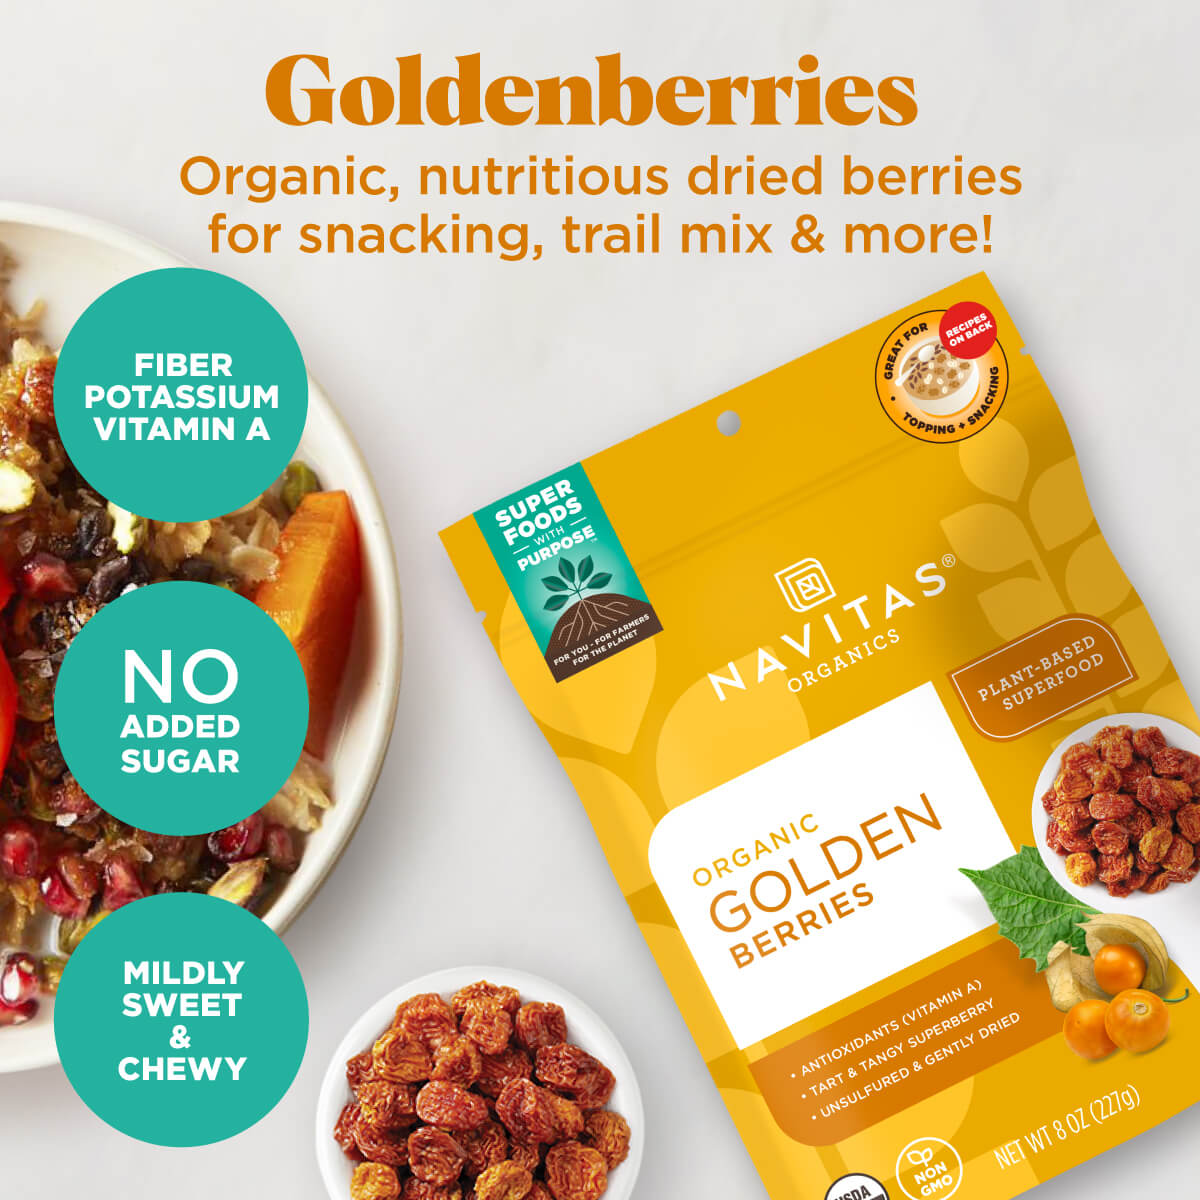 Navitas Organics Goldenberries are organic, nutritious dried berries for snacking, trail mix & more! Containing fiber, potassium, vitamin A and no added sugar, they are mildly sweet and chewy.